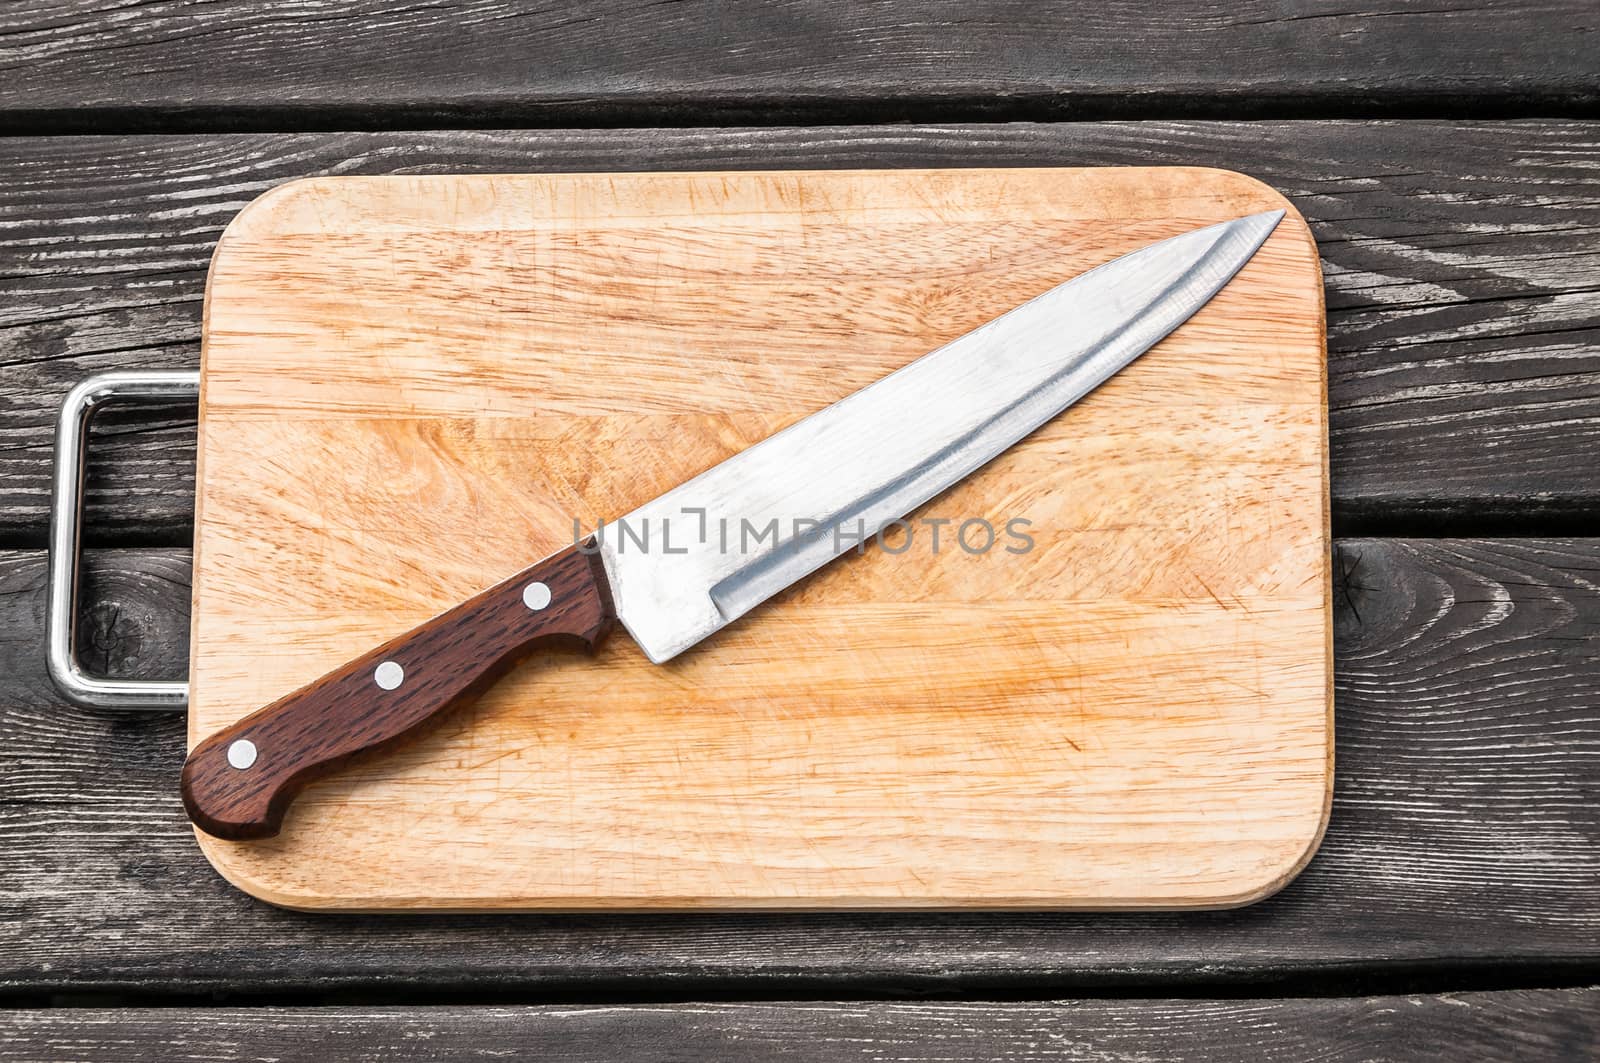 Steel knife on a cutting board  wooden background with by zeffss